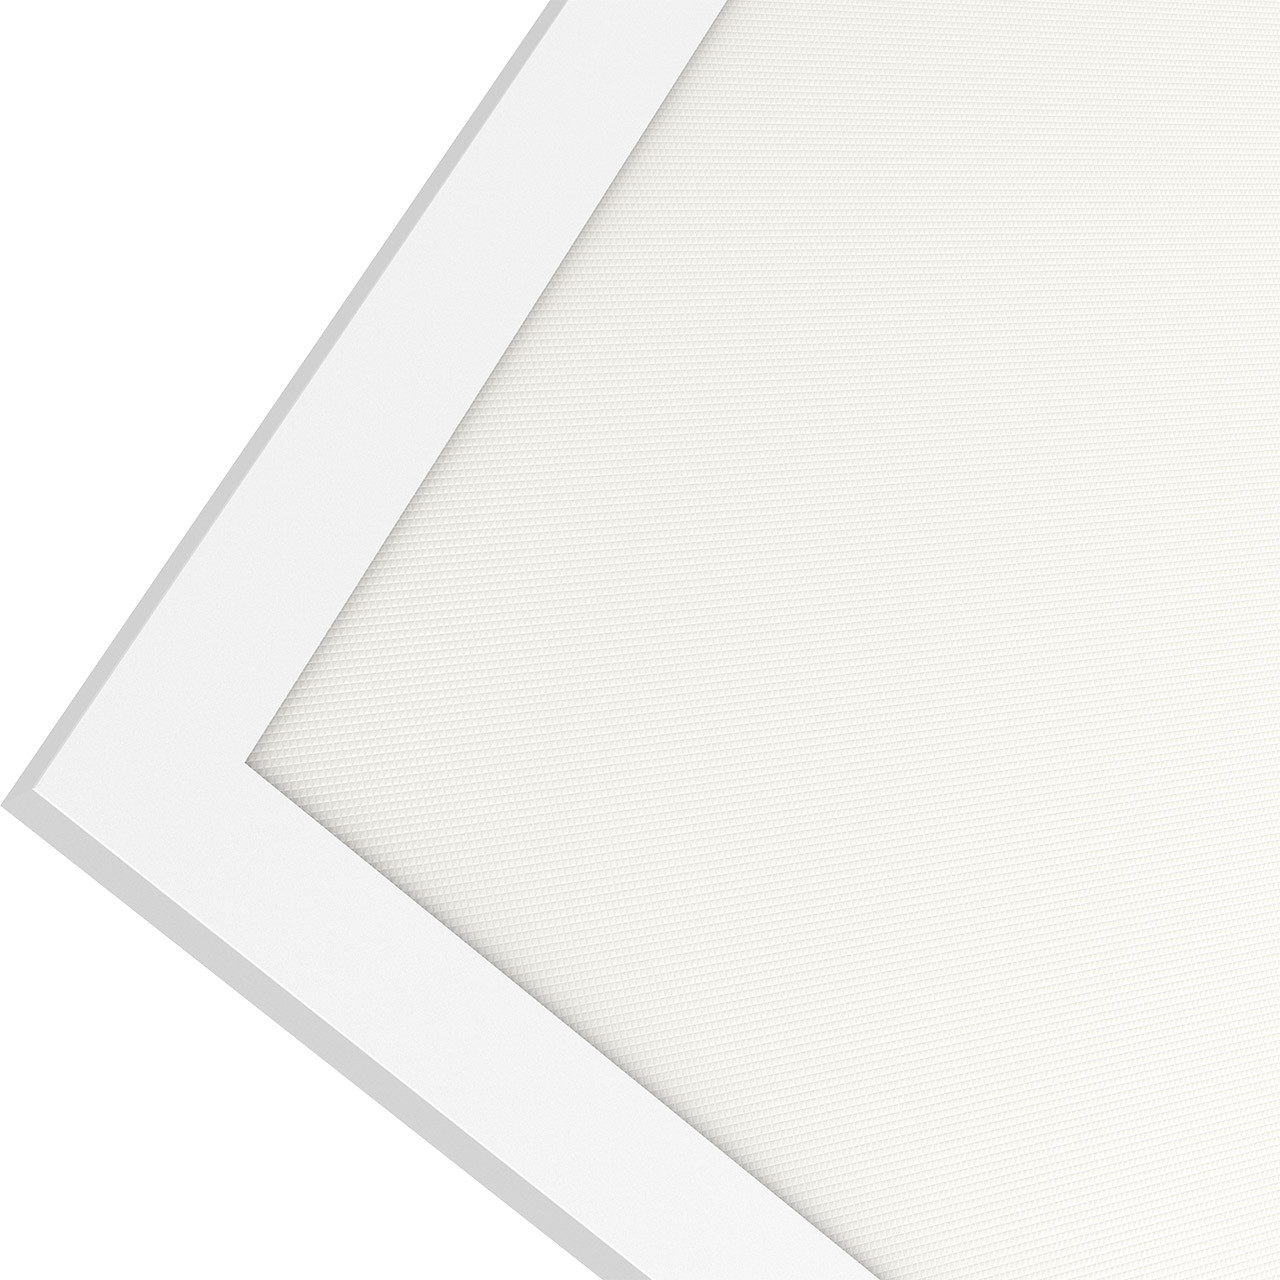 Photos - Floodlight / Street Light Phoebe LED Backlit Ceiling Panel 45W 1200x600 Warm White TP(a) Rated 16729 